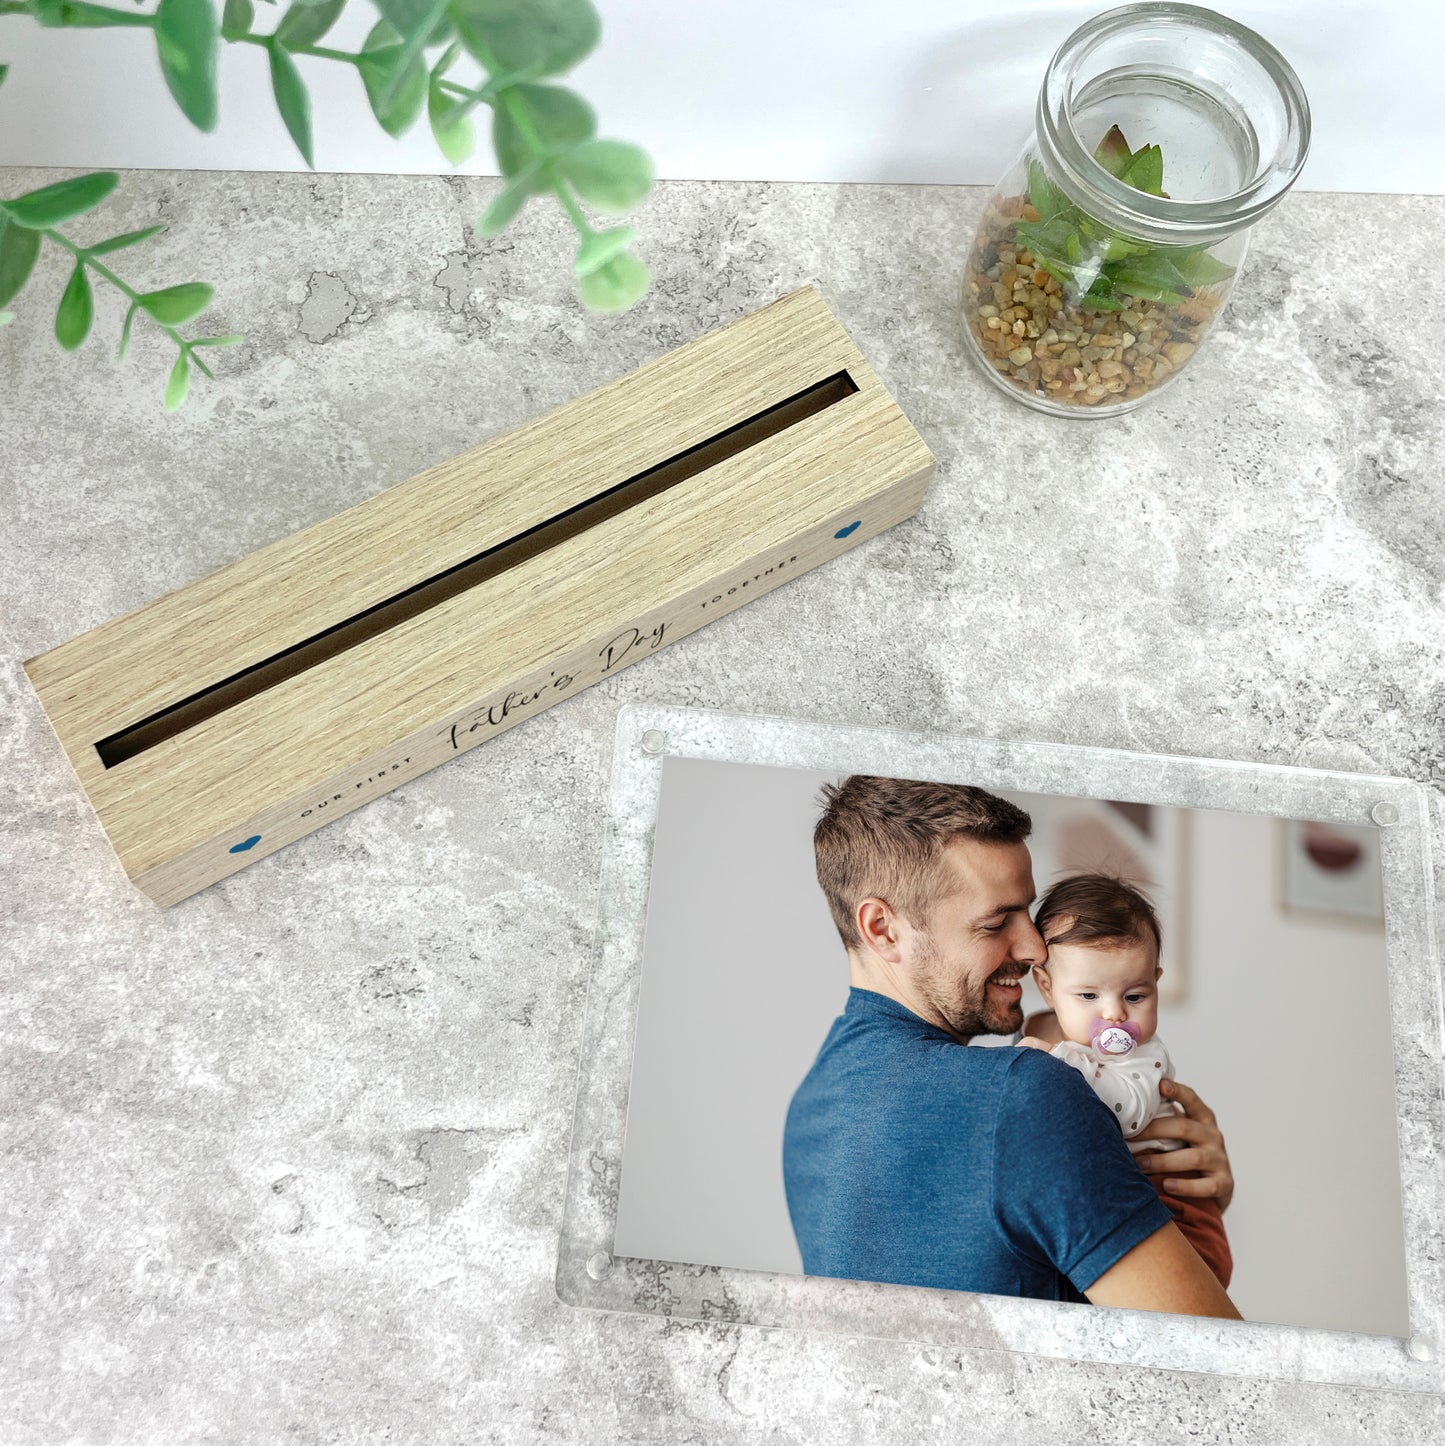 Personalised 'Our First...' Wooden Base 6x4" Photo Frame